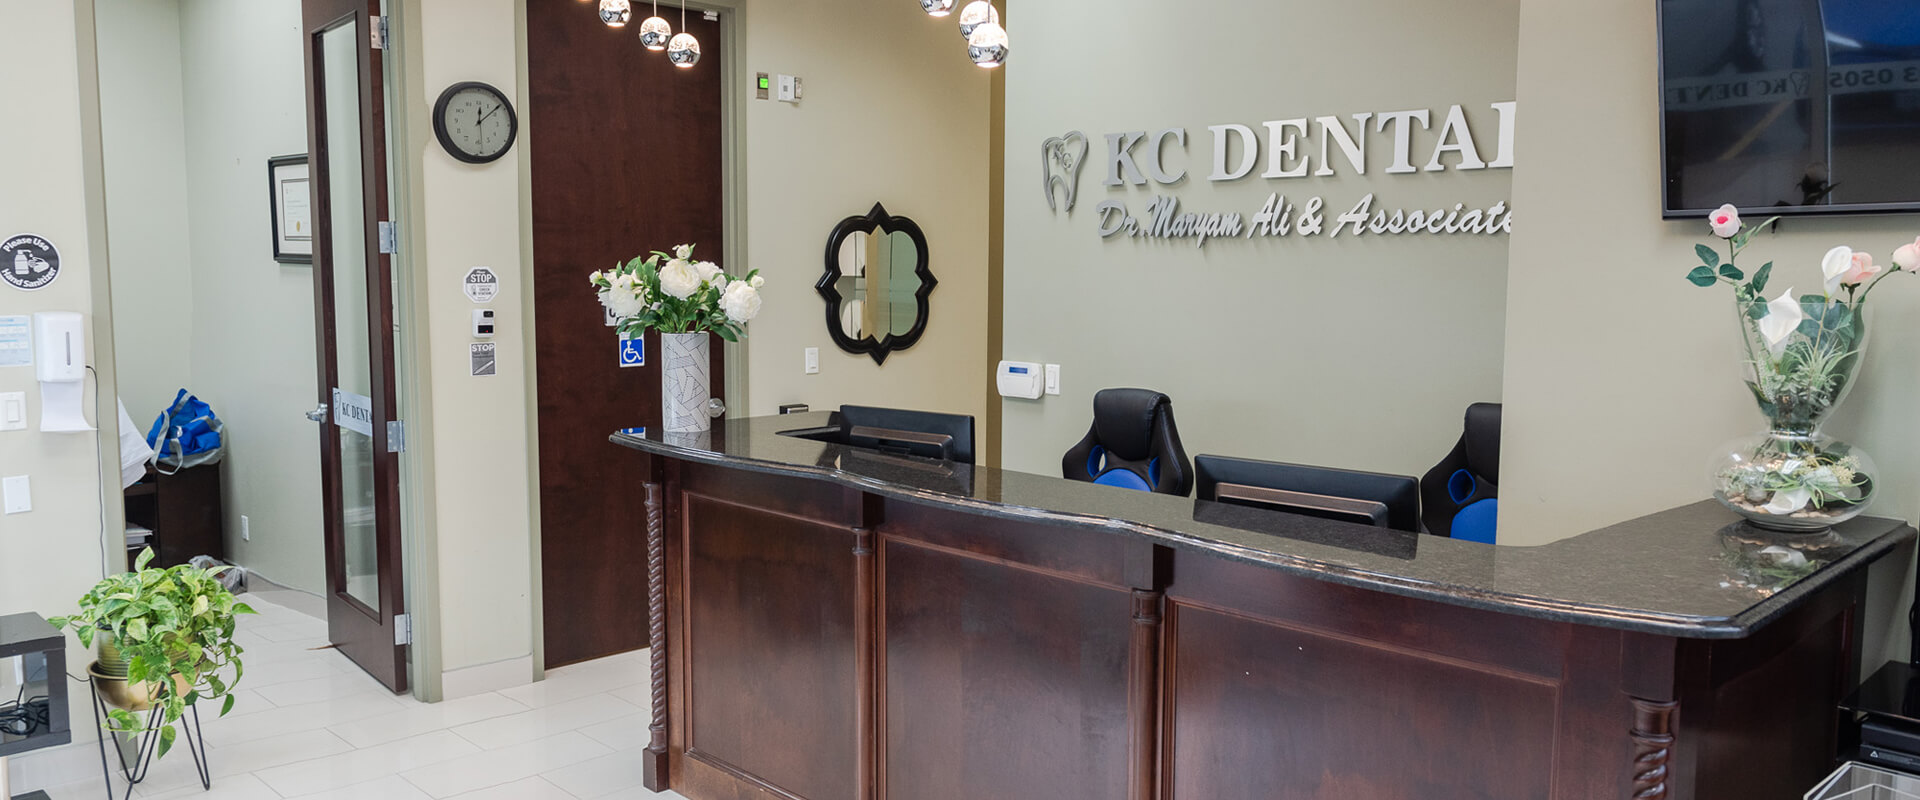 Welcome to KC Dental 